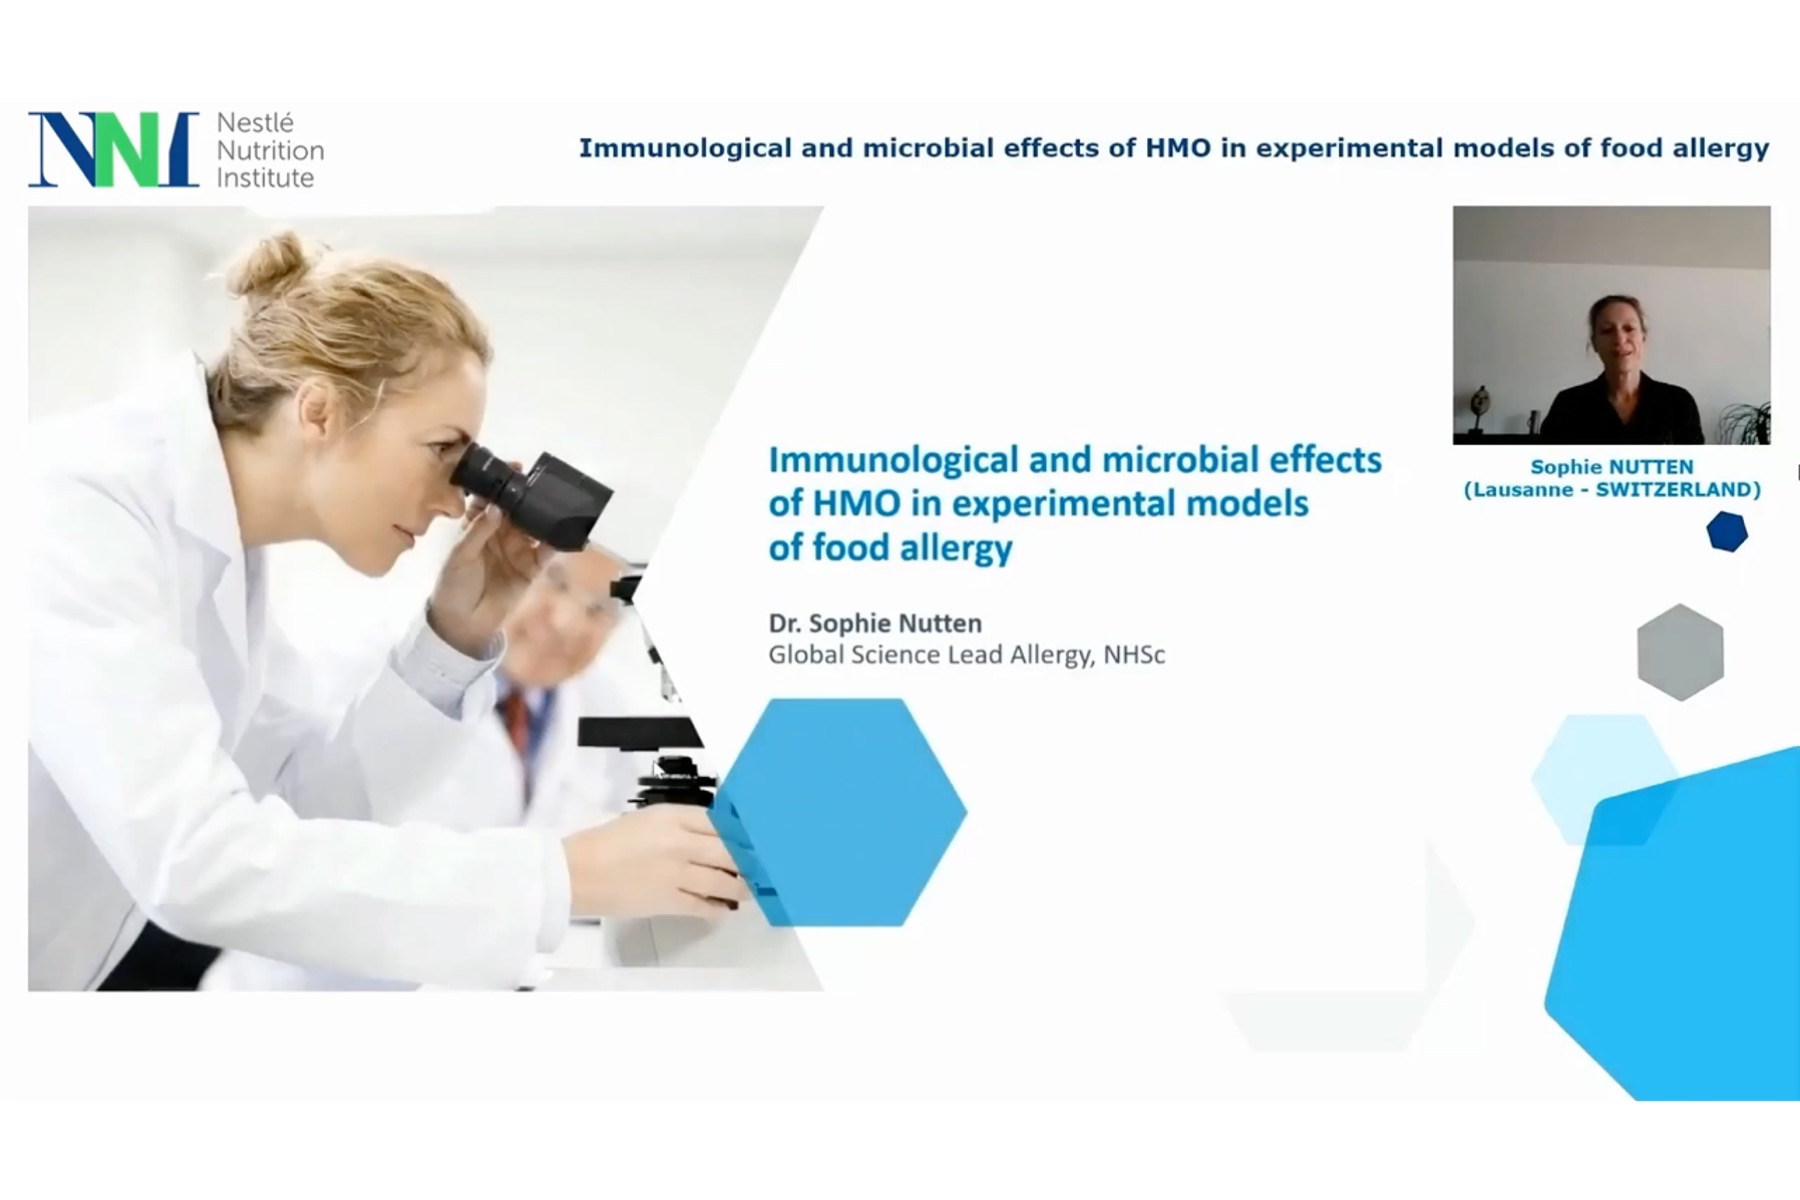 Immunological and microbial effects of HMO in experimental models of food allergy